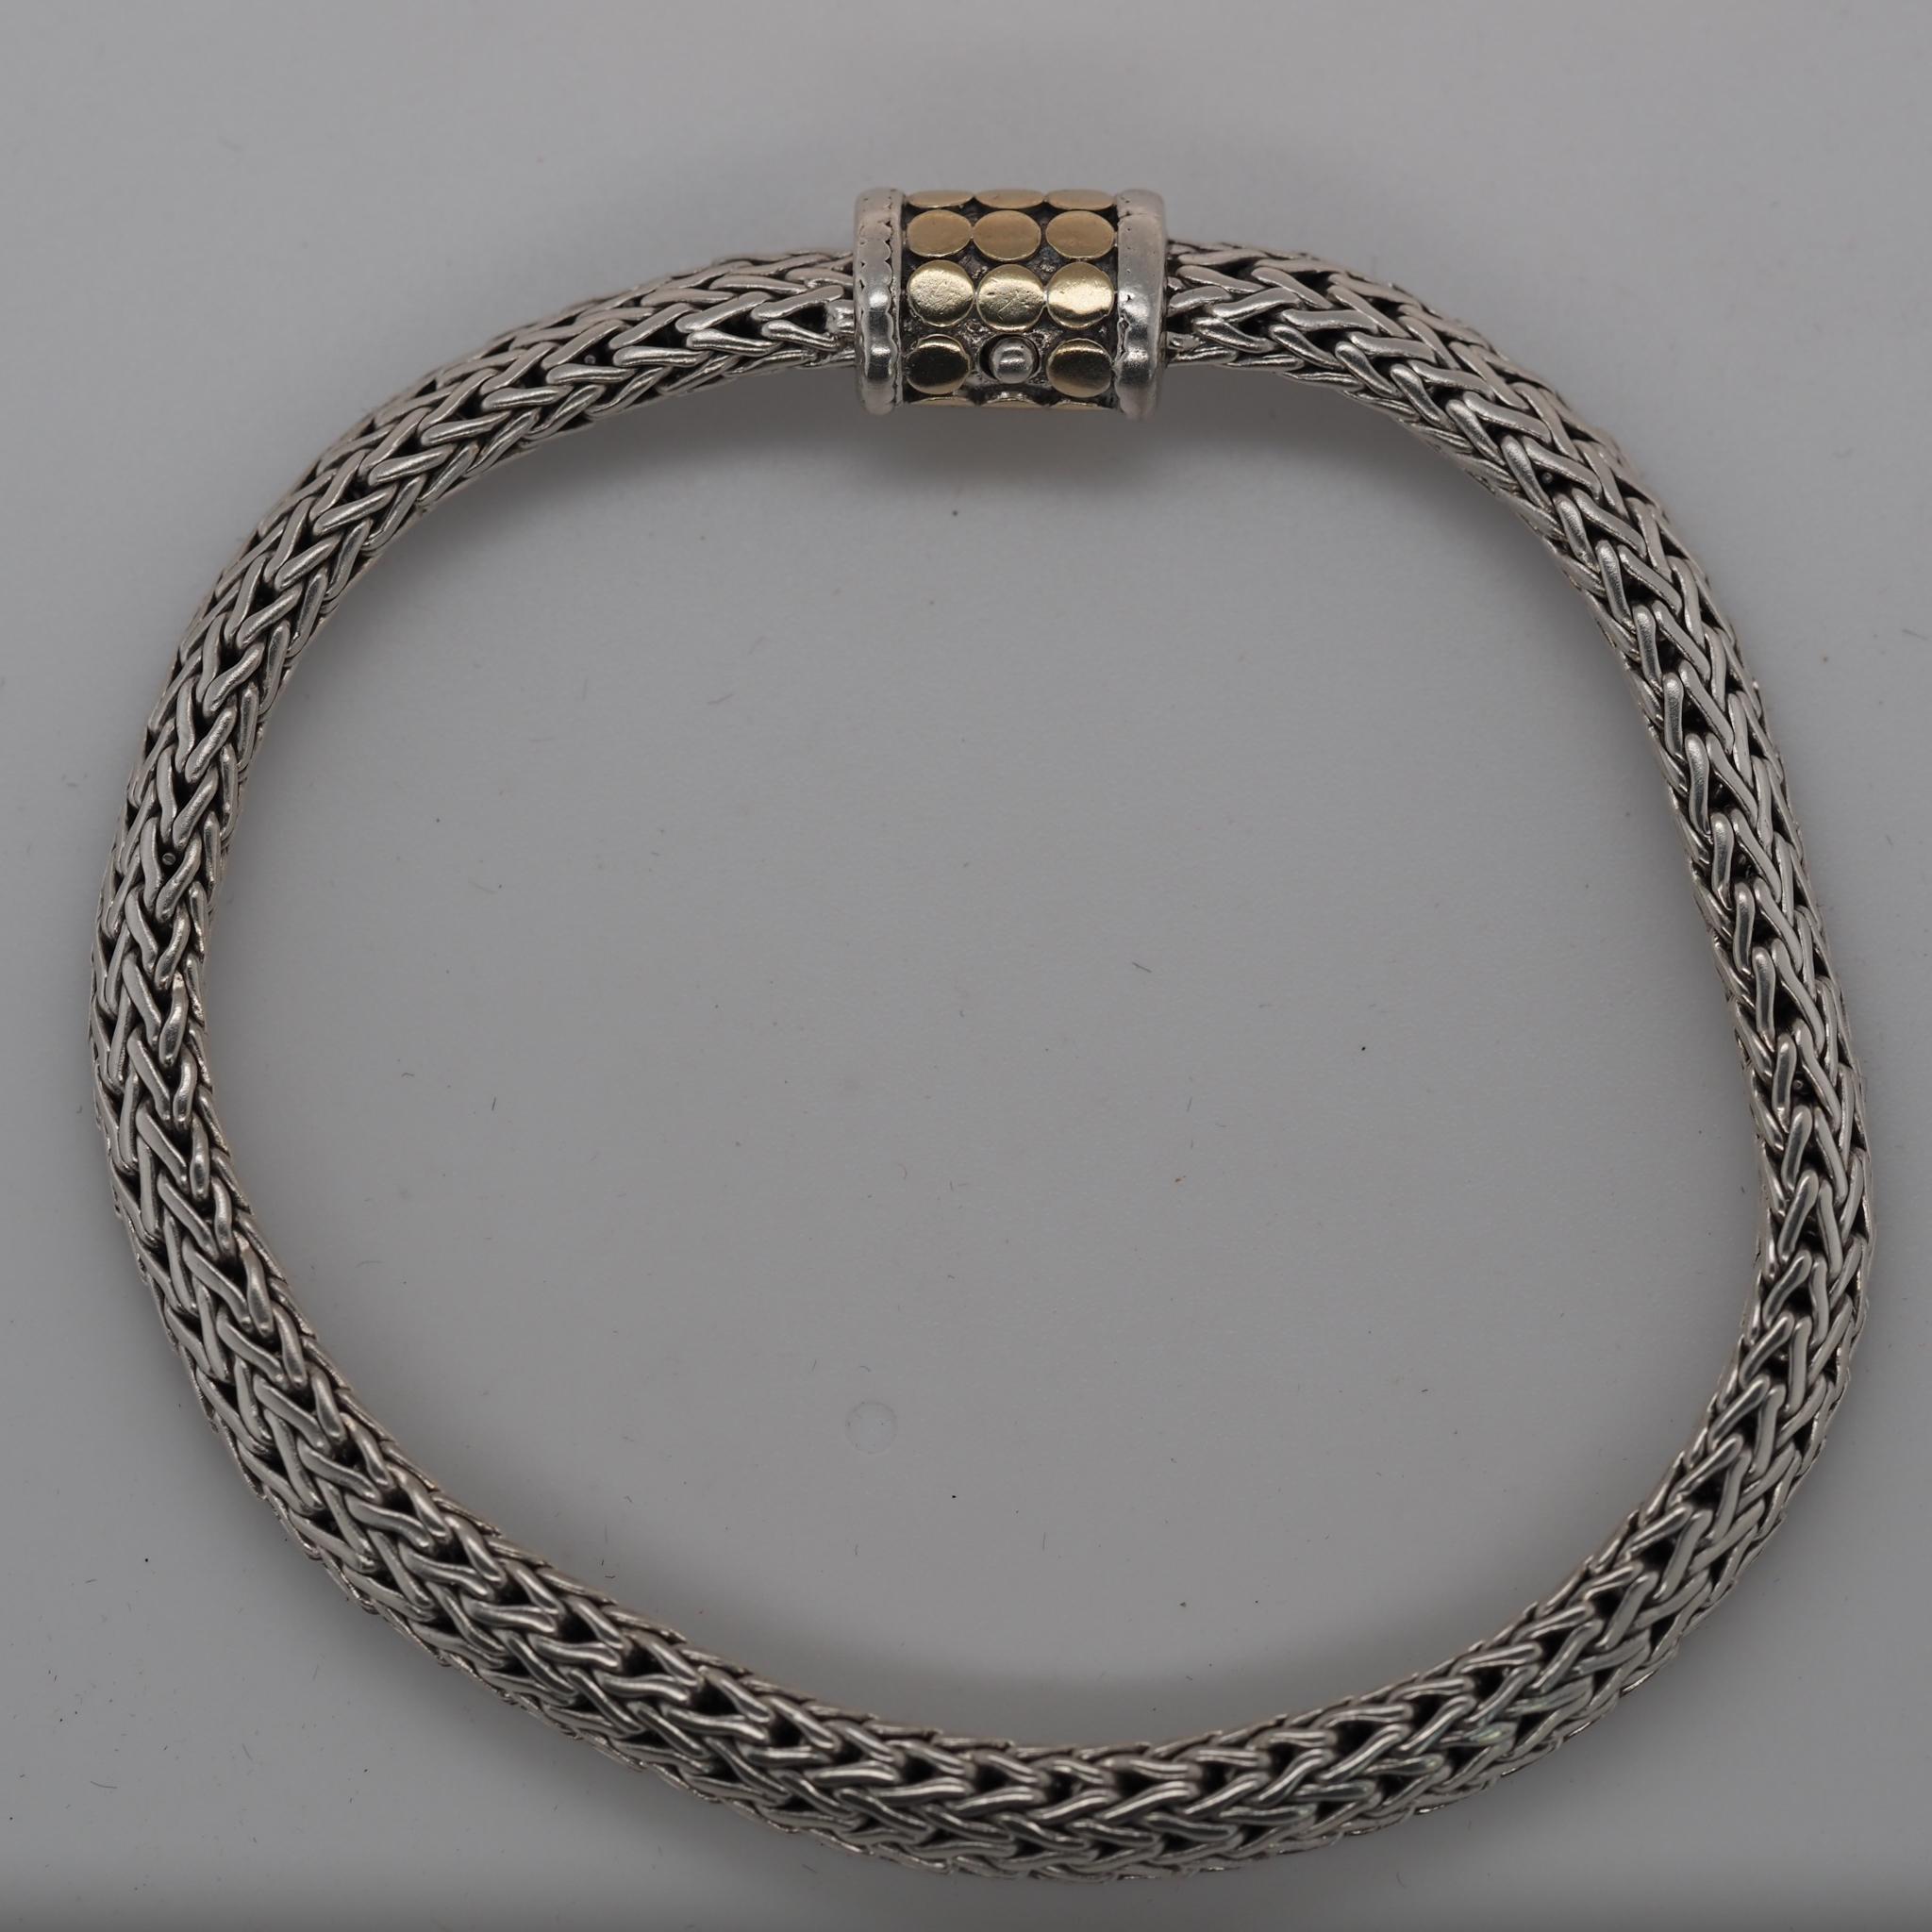 Designer: John Hardy
Item Details:
Metal Type: 18K Yellow Gold and Sterling Silver [Hallmarked, and Tested]
Weight: 24.8 grams (All Items Total)
‌
Bracelet Length Measurement: 8 Inches
Condition: Excellent